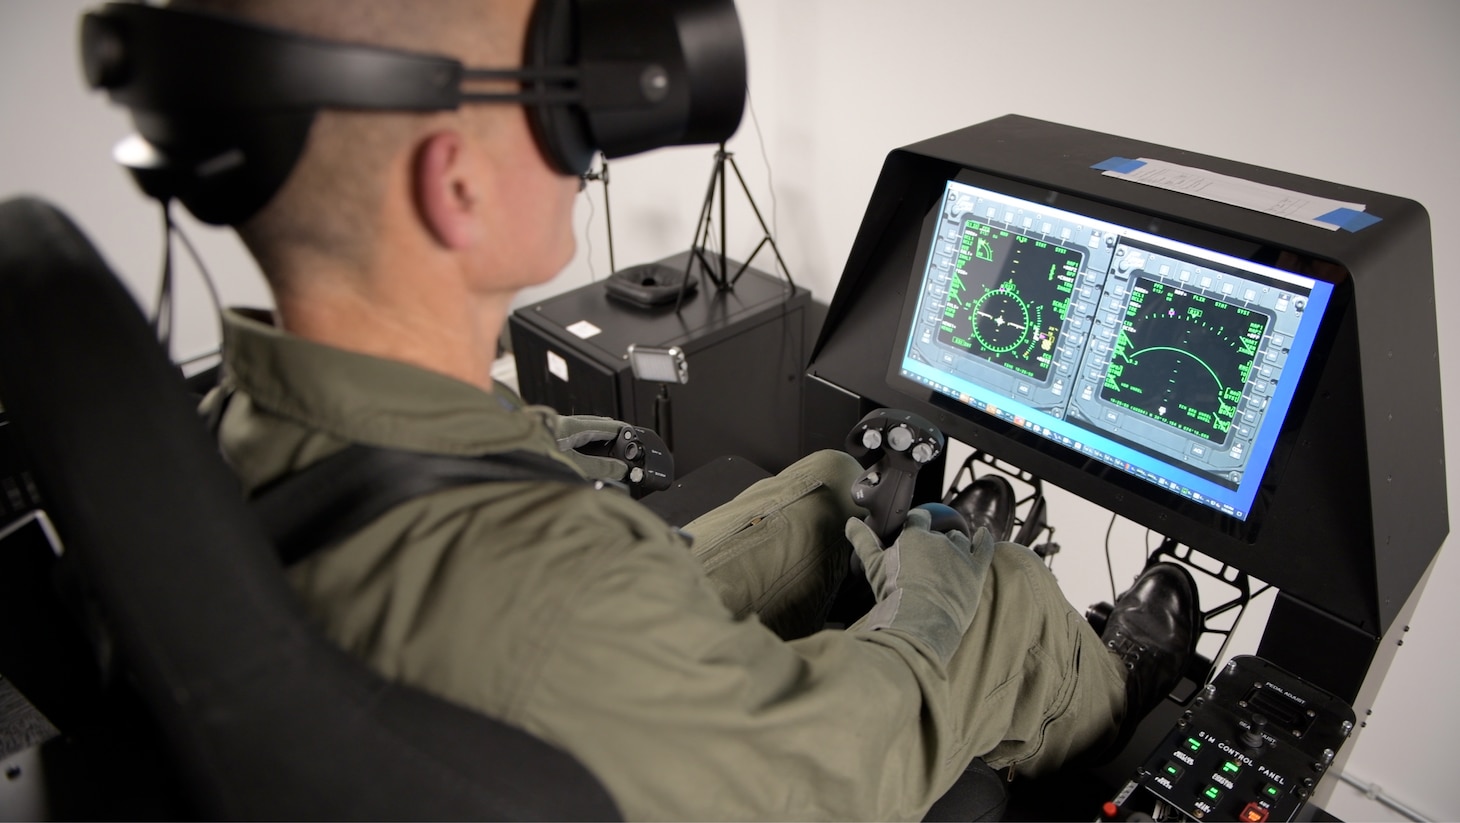 Former CH-53K pilot James “Pipes” Pritchard operates the VR/MR simulator during a demonstration at Manned Flight Simulators at NAS Patuxent River, Maryland.